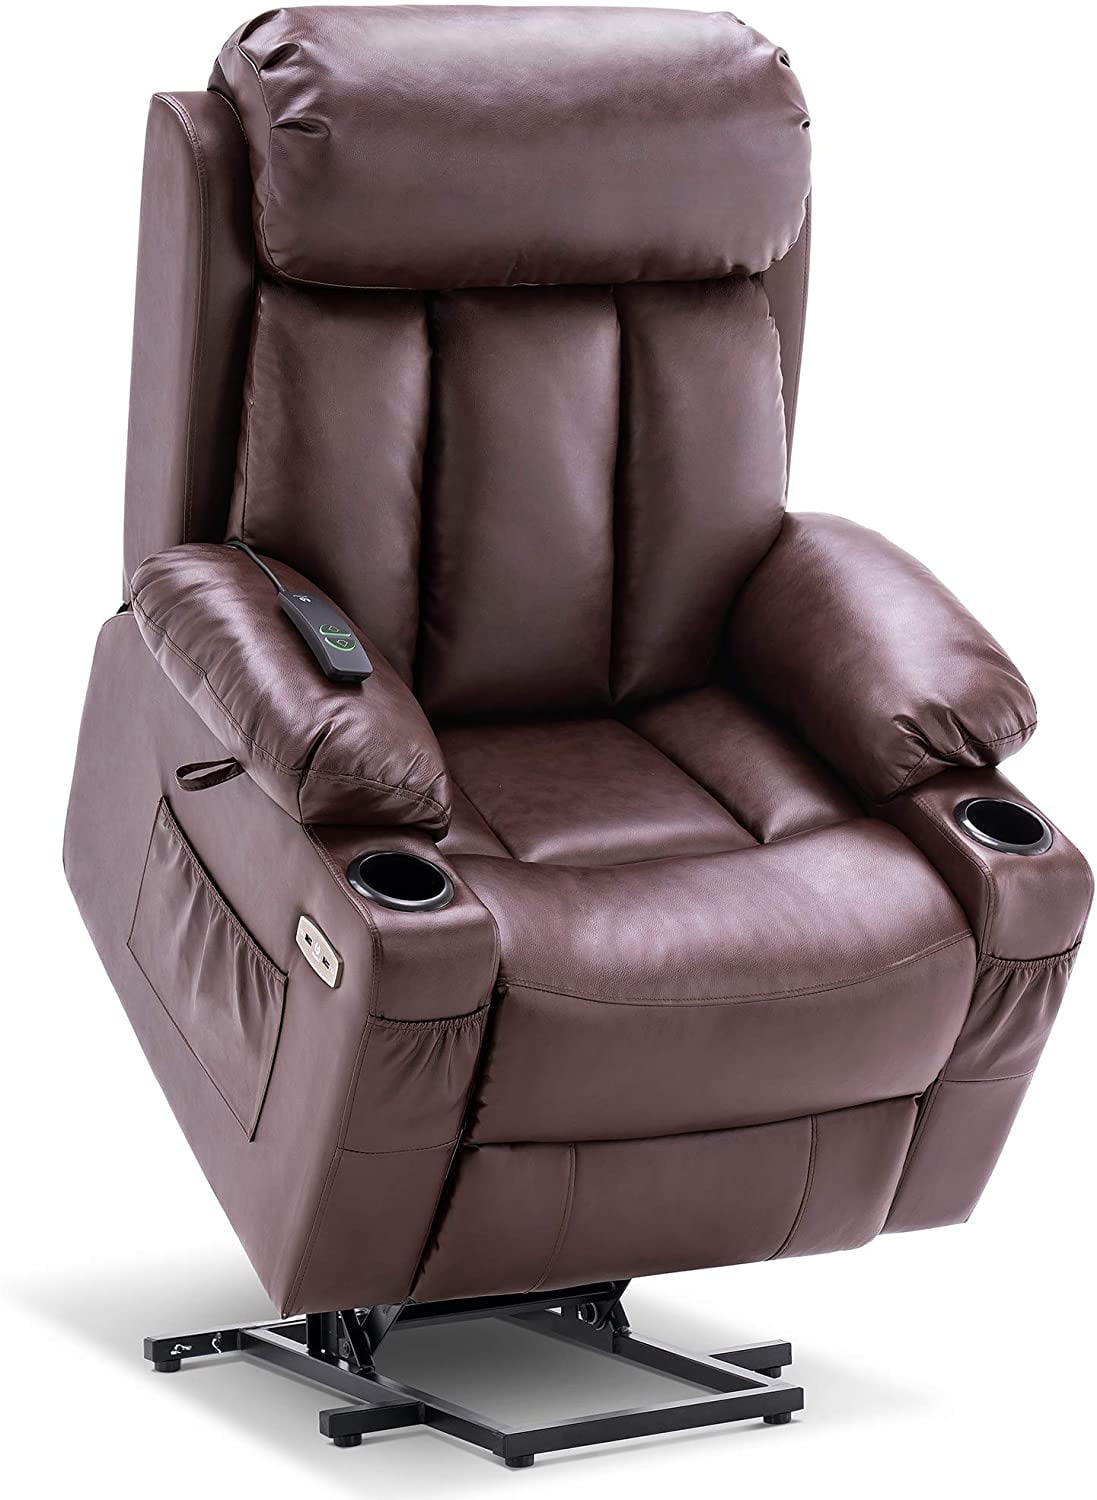 Electric Power Lift Recliner Chair, Dark Brown Real Leather Recliner Chair